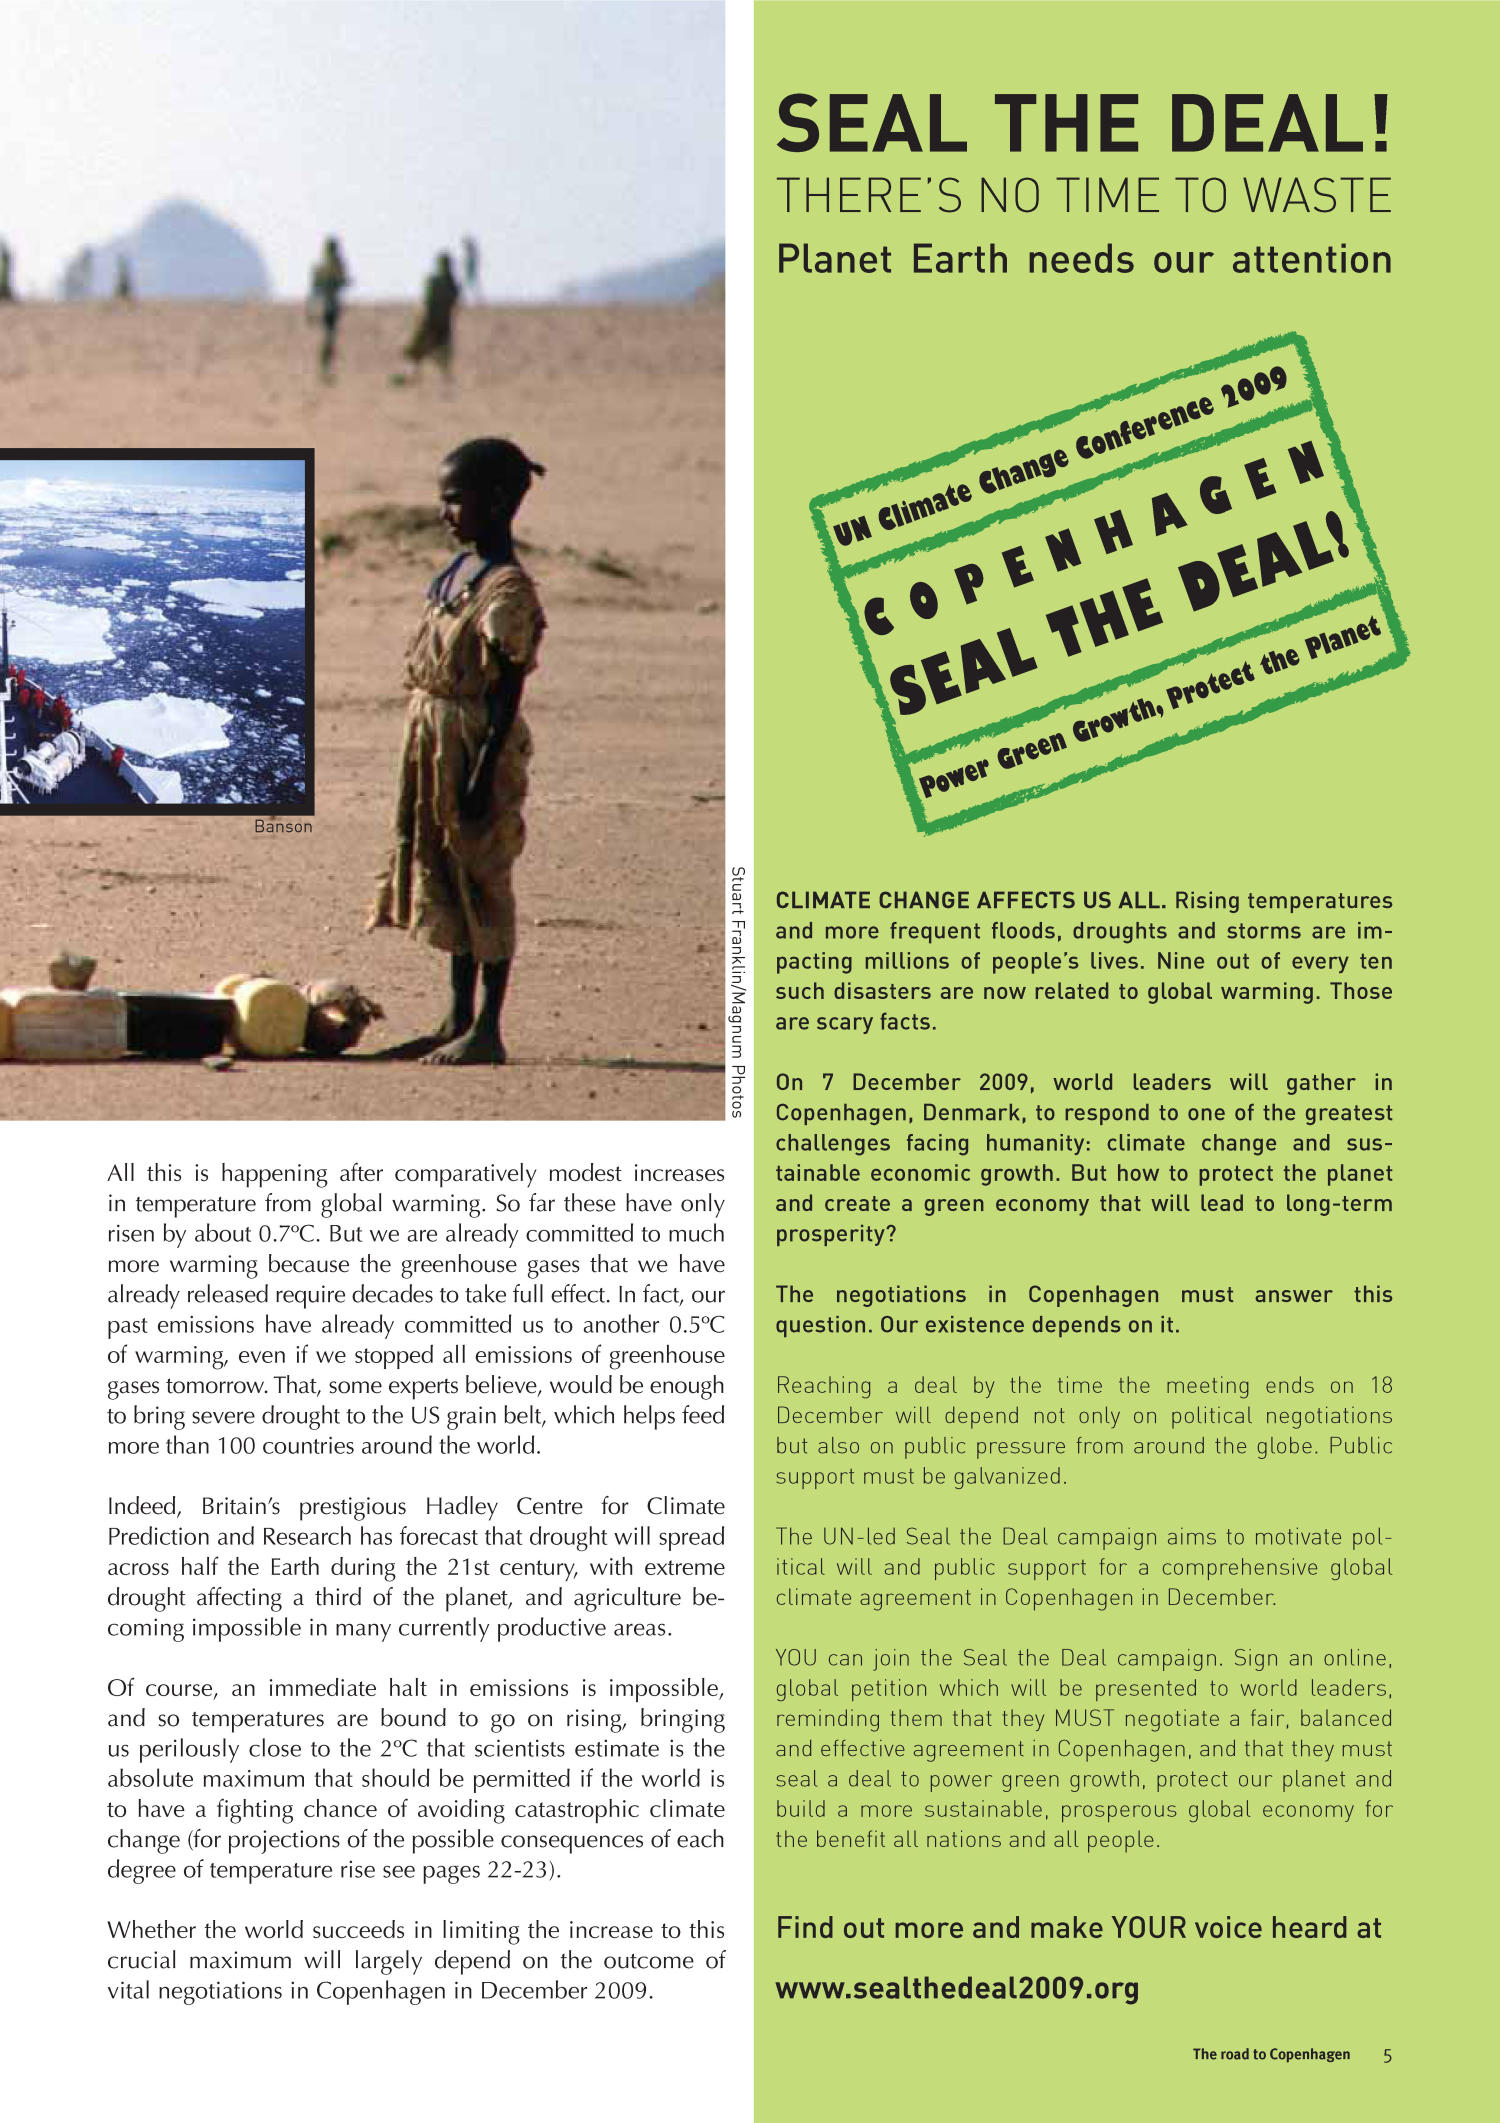 Tunza: The UNEP Magazine for Youth, Volume 7, Number 2, 2009
                                                
                                                    5
                                                